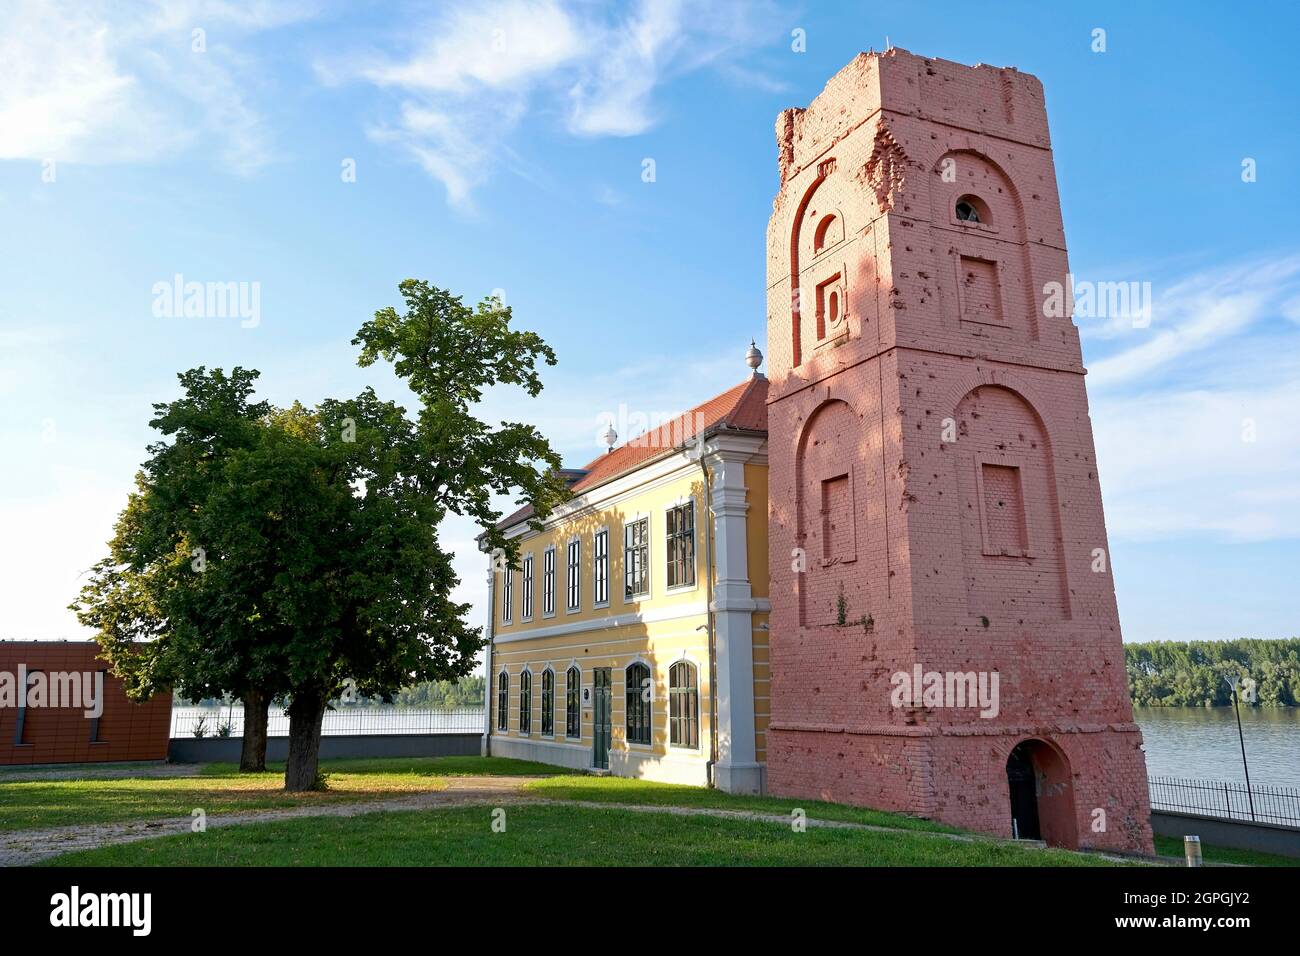 Croatia, Slavonia, Vukovar, Eltz castle, 18th century baroque palace which houses the municipal museum of Vukovar, destroyed after the Croatian war and then restored in 2011, some parts still have the scars of the clashes Stock Photo